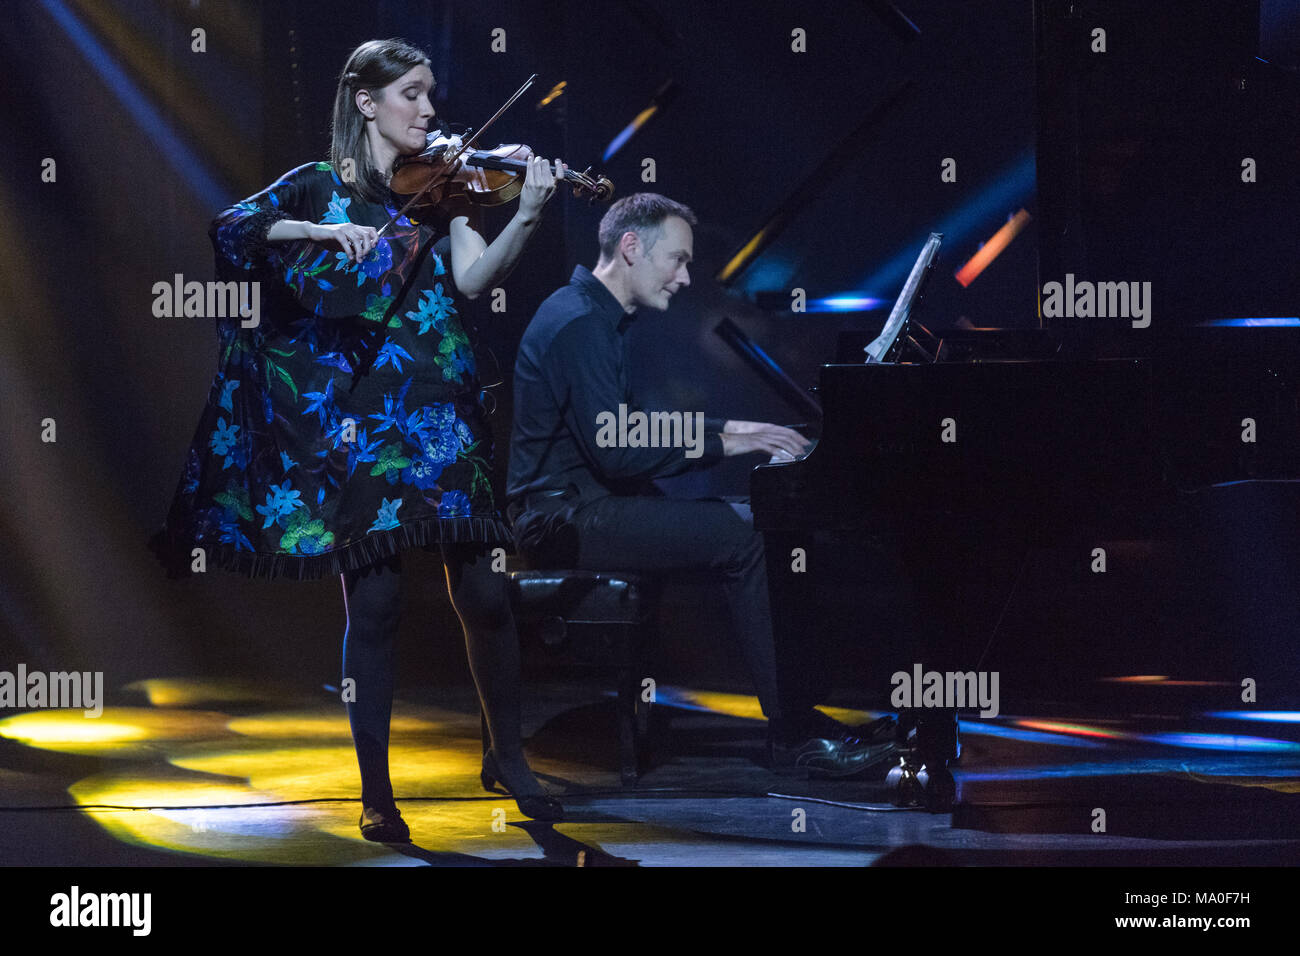 Norway, Oslo - February 25, 2018. The Norwegian violinist Guro Kleven Hagen performs live during the Norwegian Grammy Awards, Spellemannprisen 2017, at Oslo Konserthus in Oslo. (Photo credit: Gonzales Photo - Stian S. Moller). Stock Photo